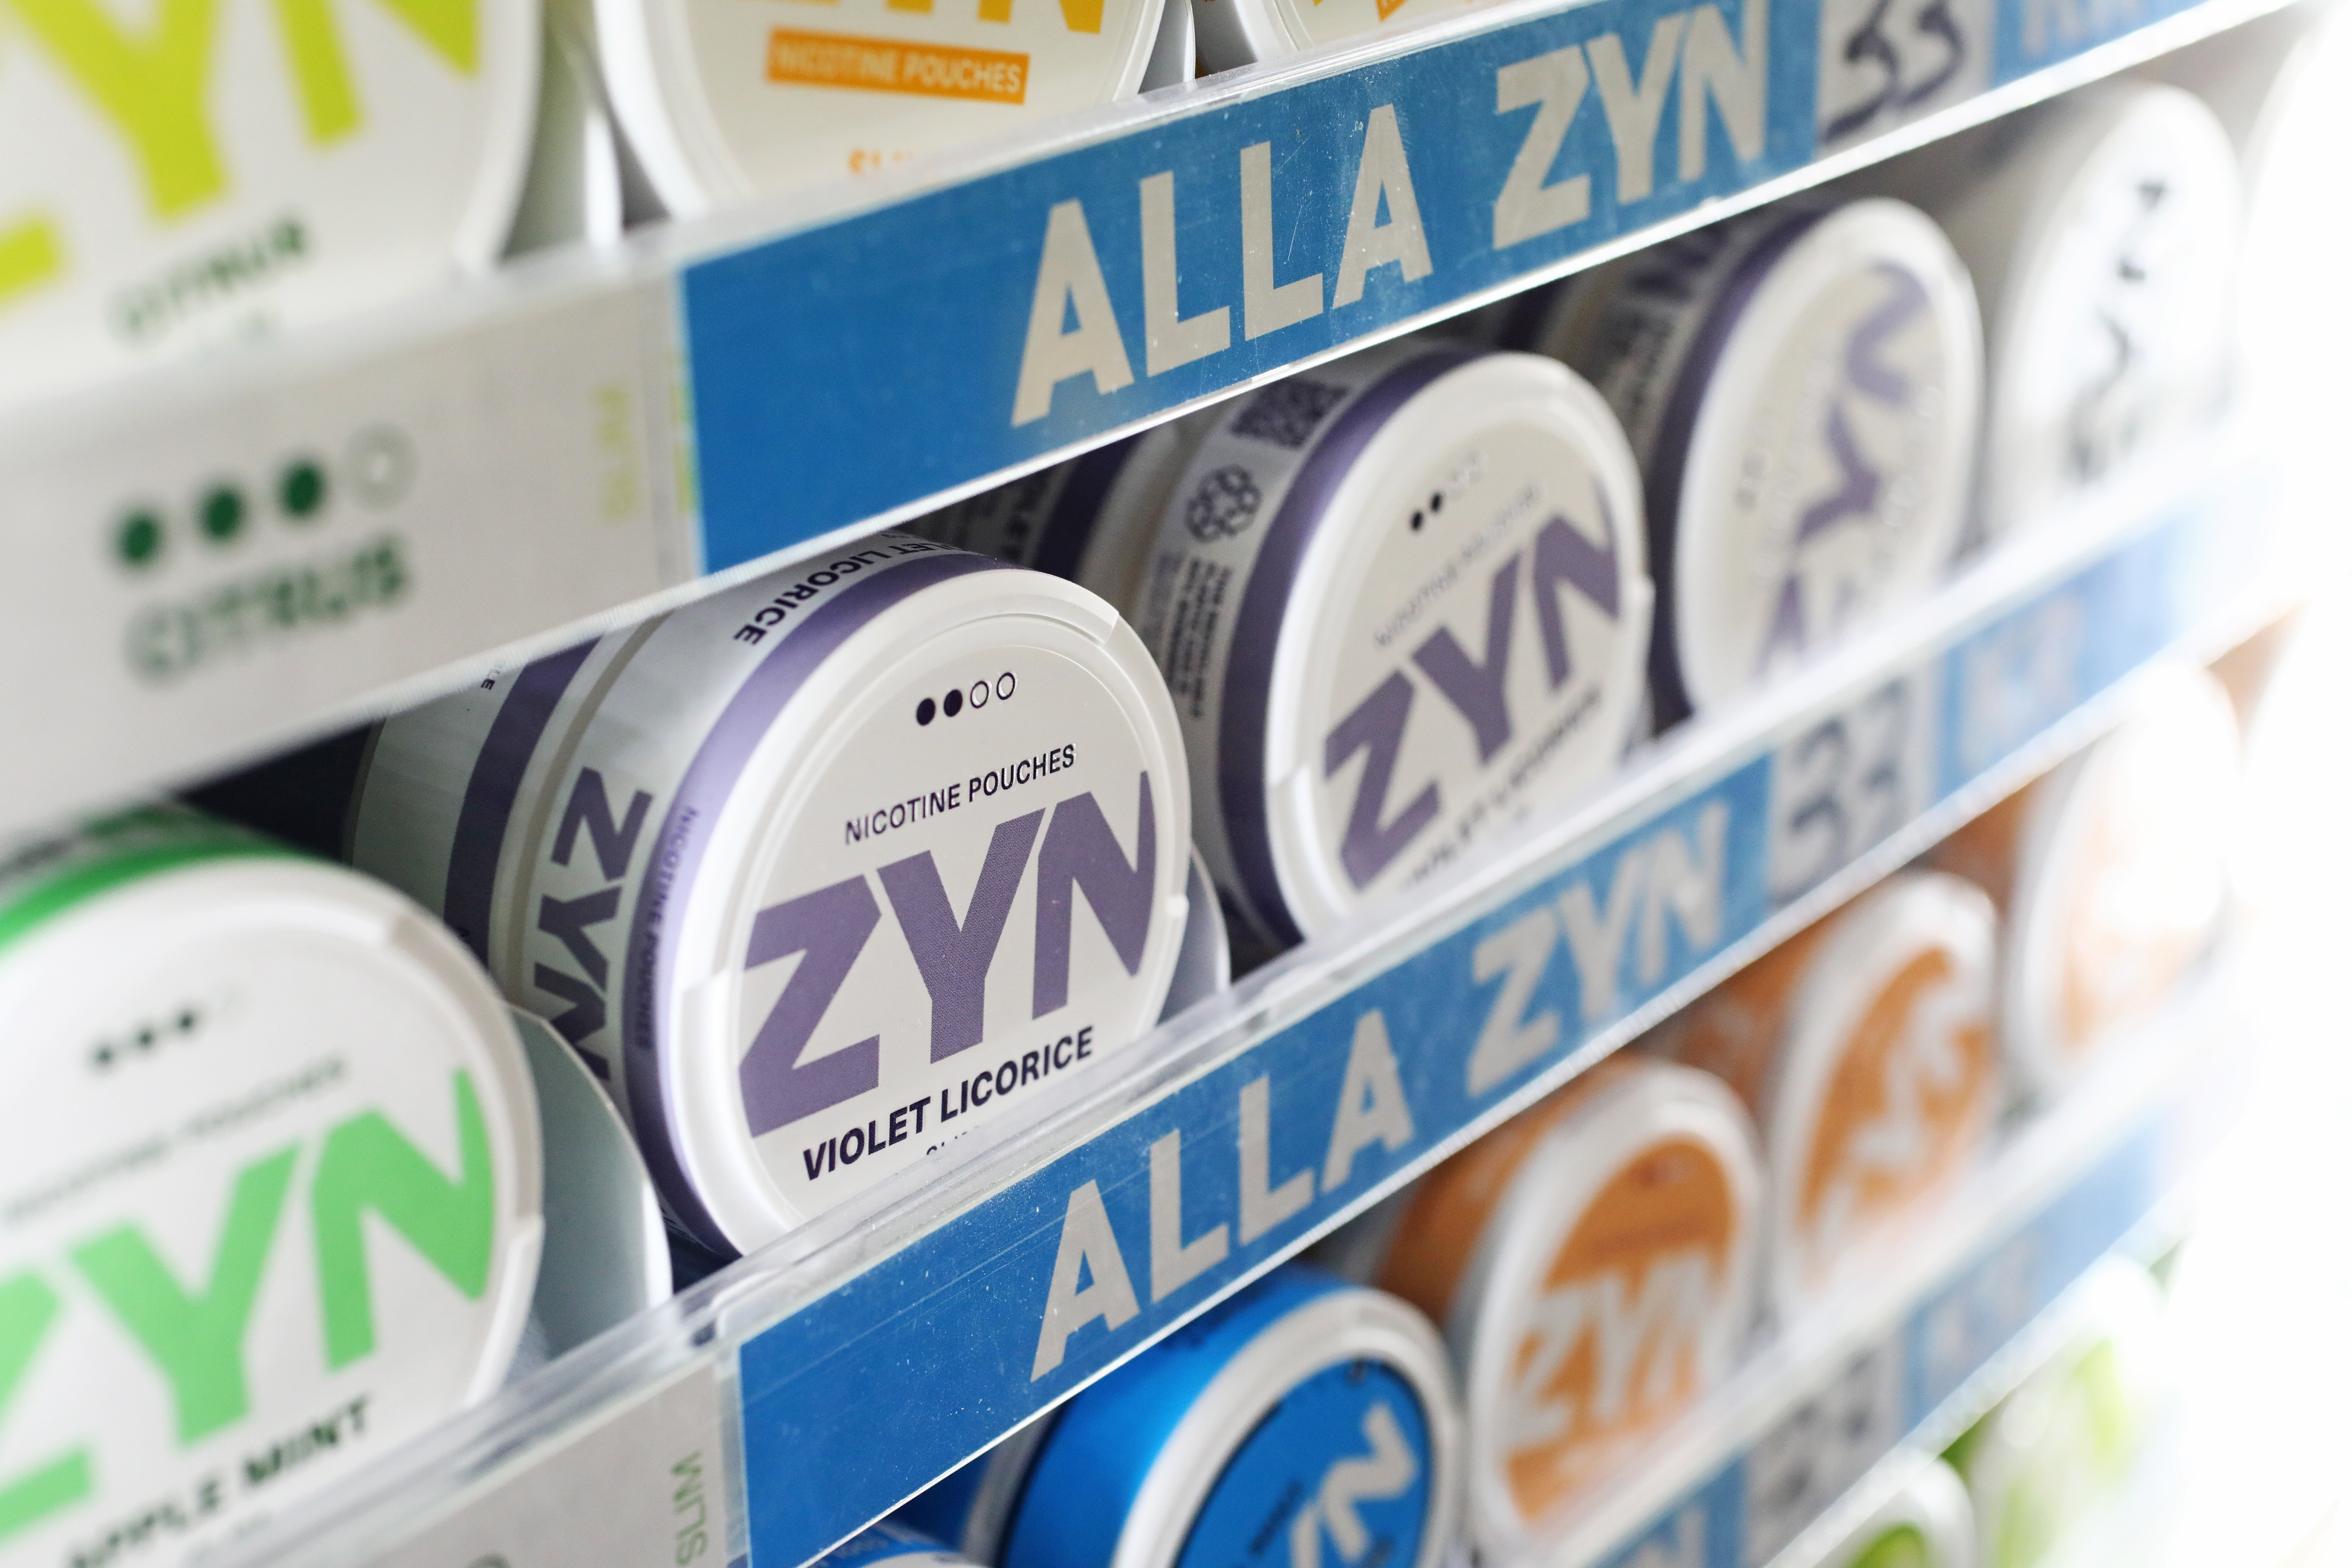 Chuck Schumer calls for crackdown on Zyn nicotine pouches